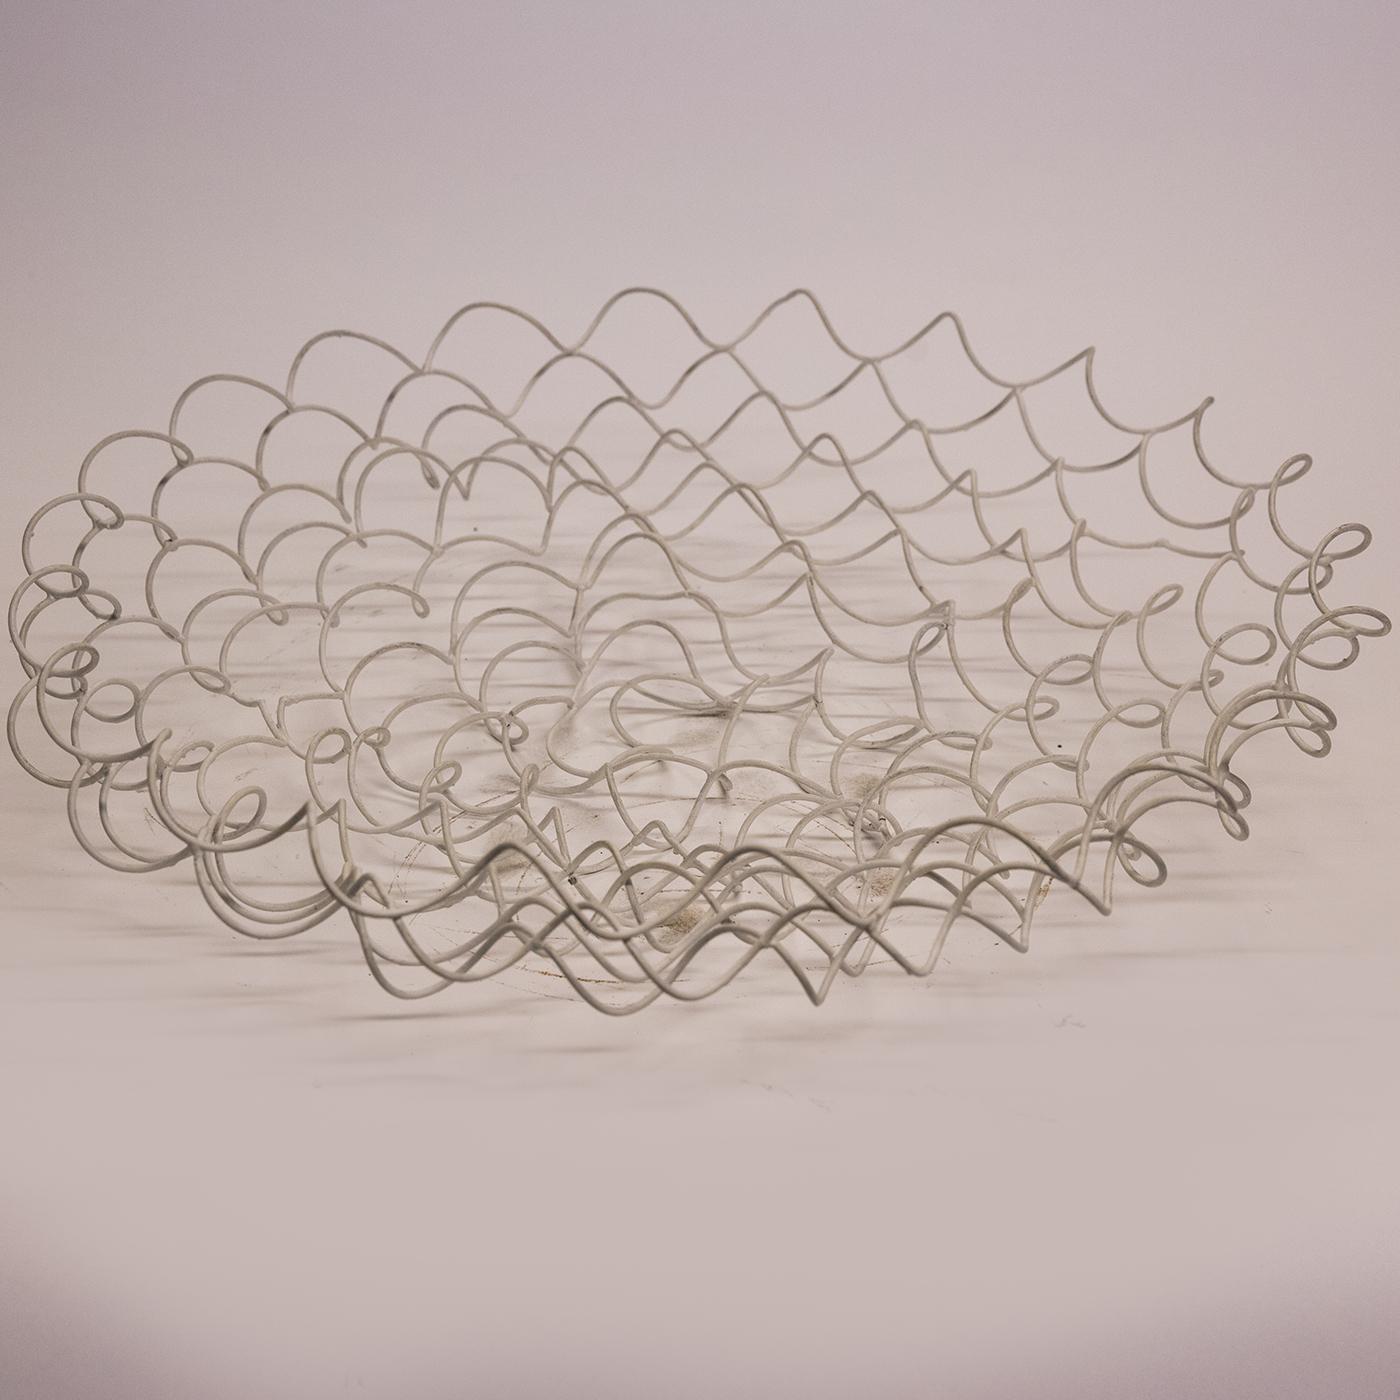 This sculptured vase by Sciortino is formed of spring-like tempered iron wire, forming an intriguing array of geometric shapes and shadows, and is finished with a coat of white paint applied by hand. Product dimensions may vary slightly due to the